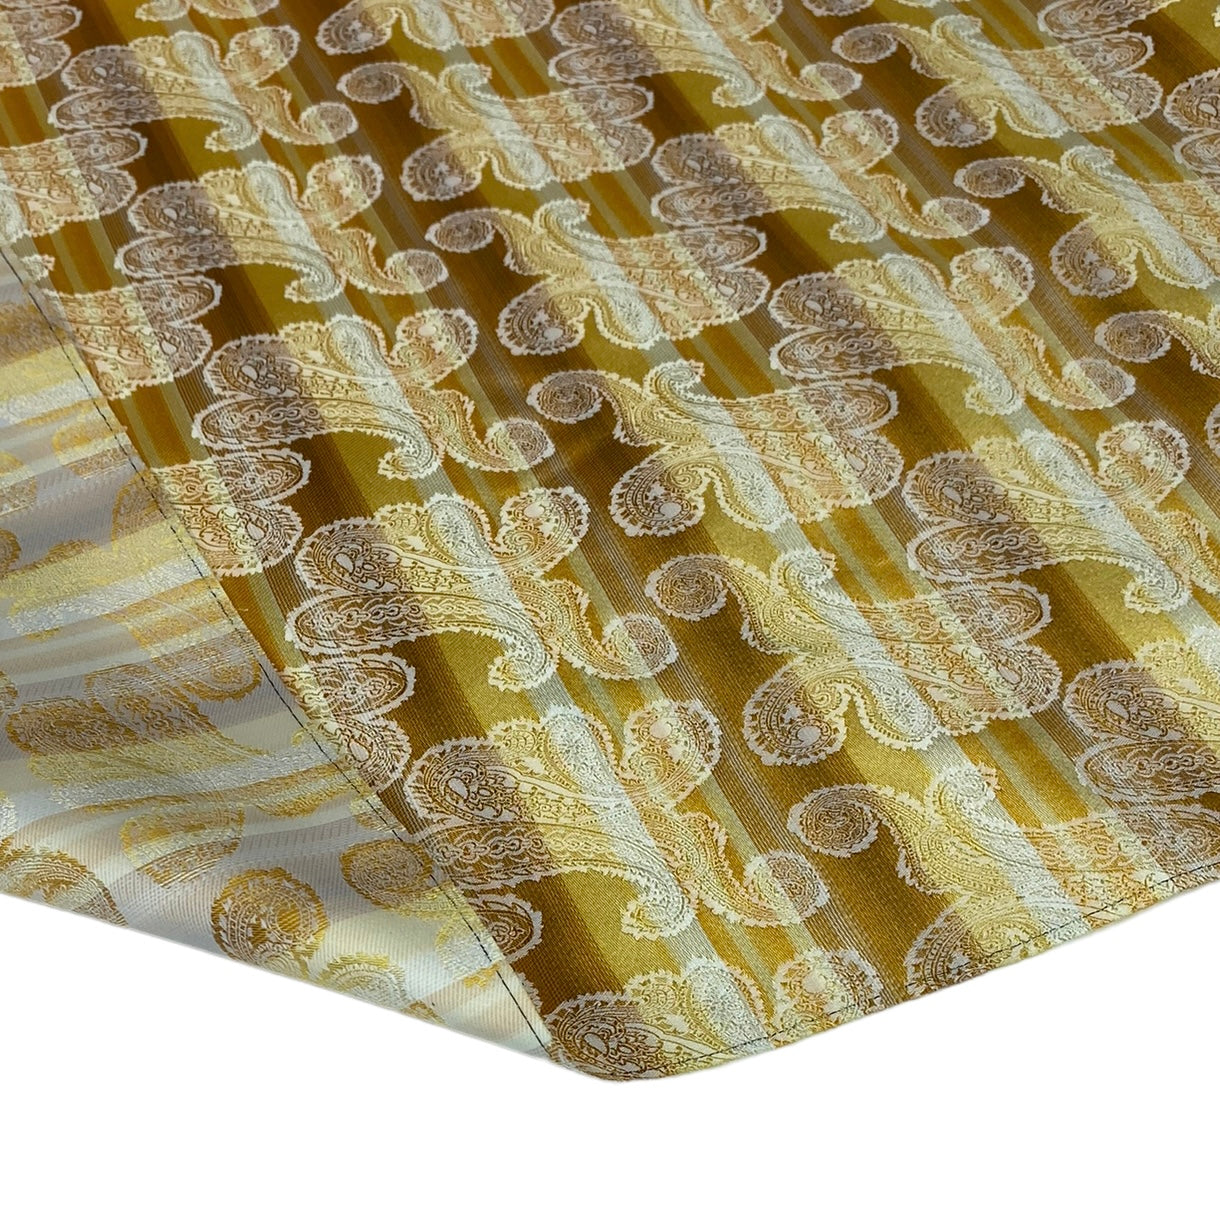 Striped Paisley Silk/Polyester Jacquard - Gold / Yellow / White - Remnant